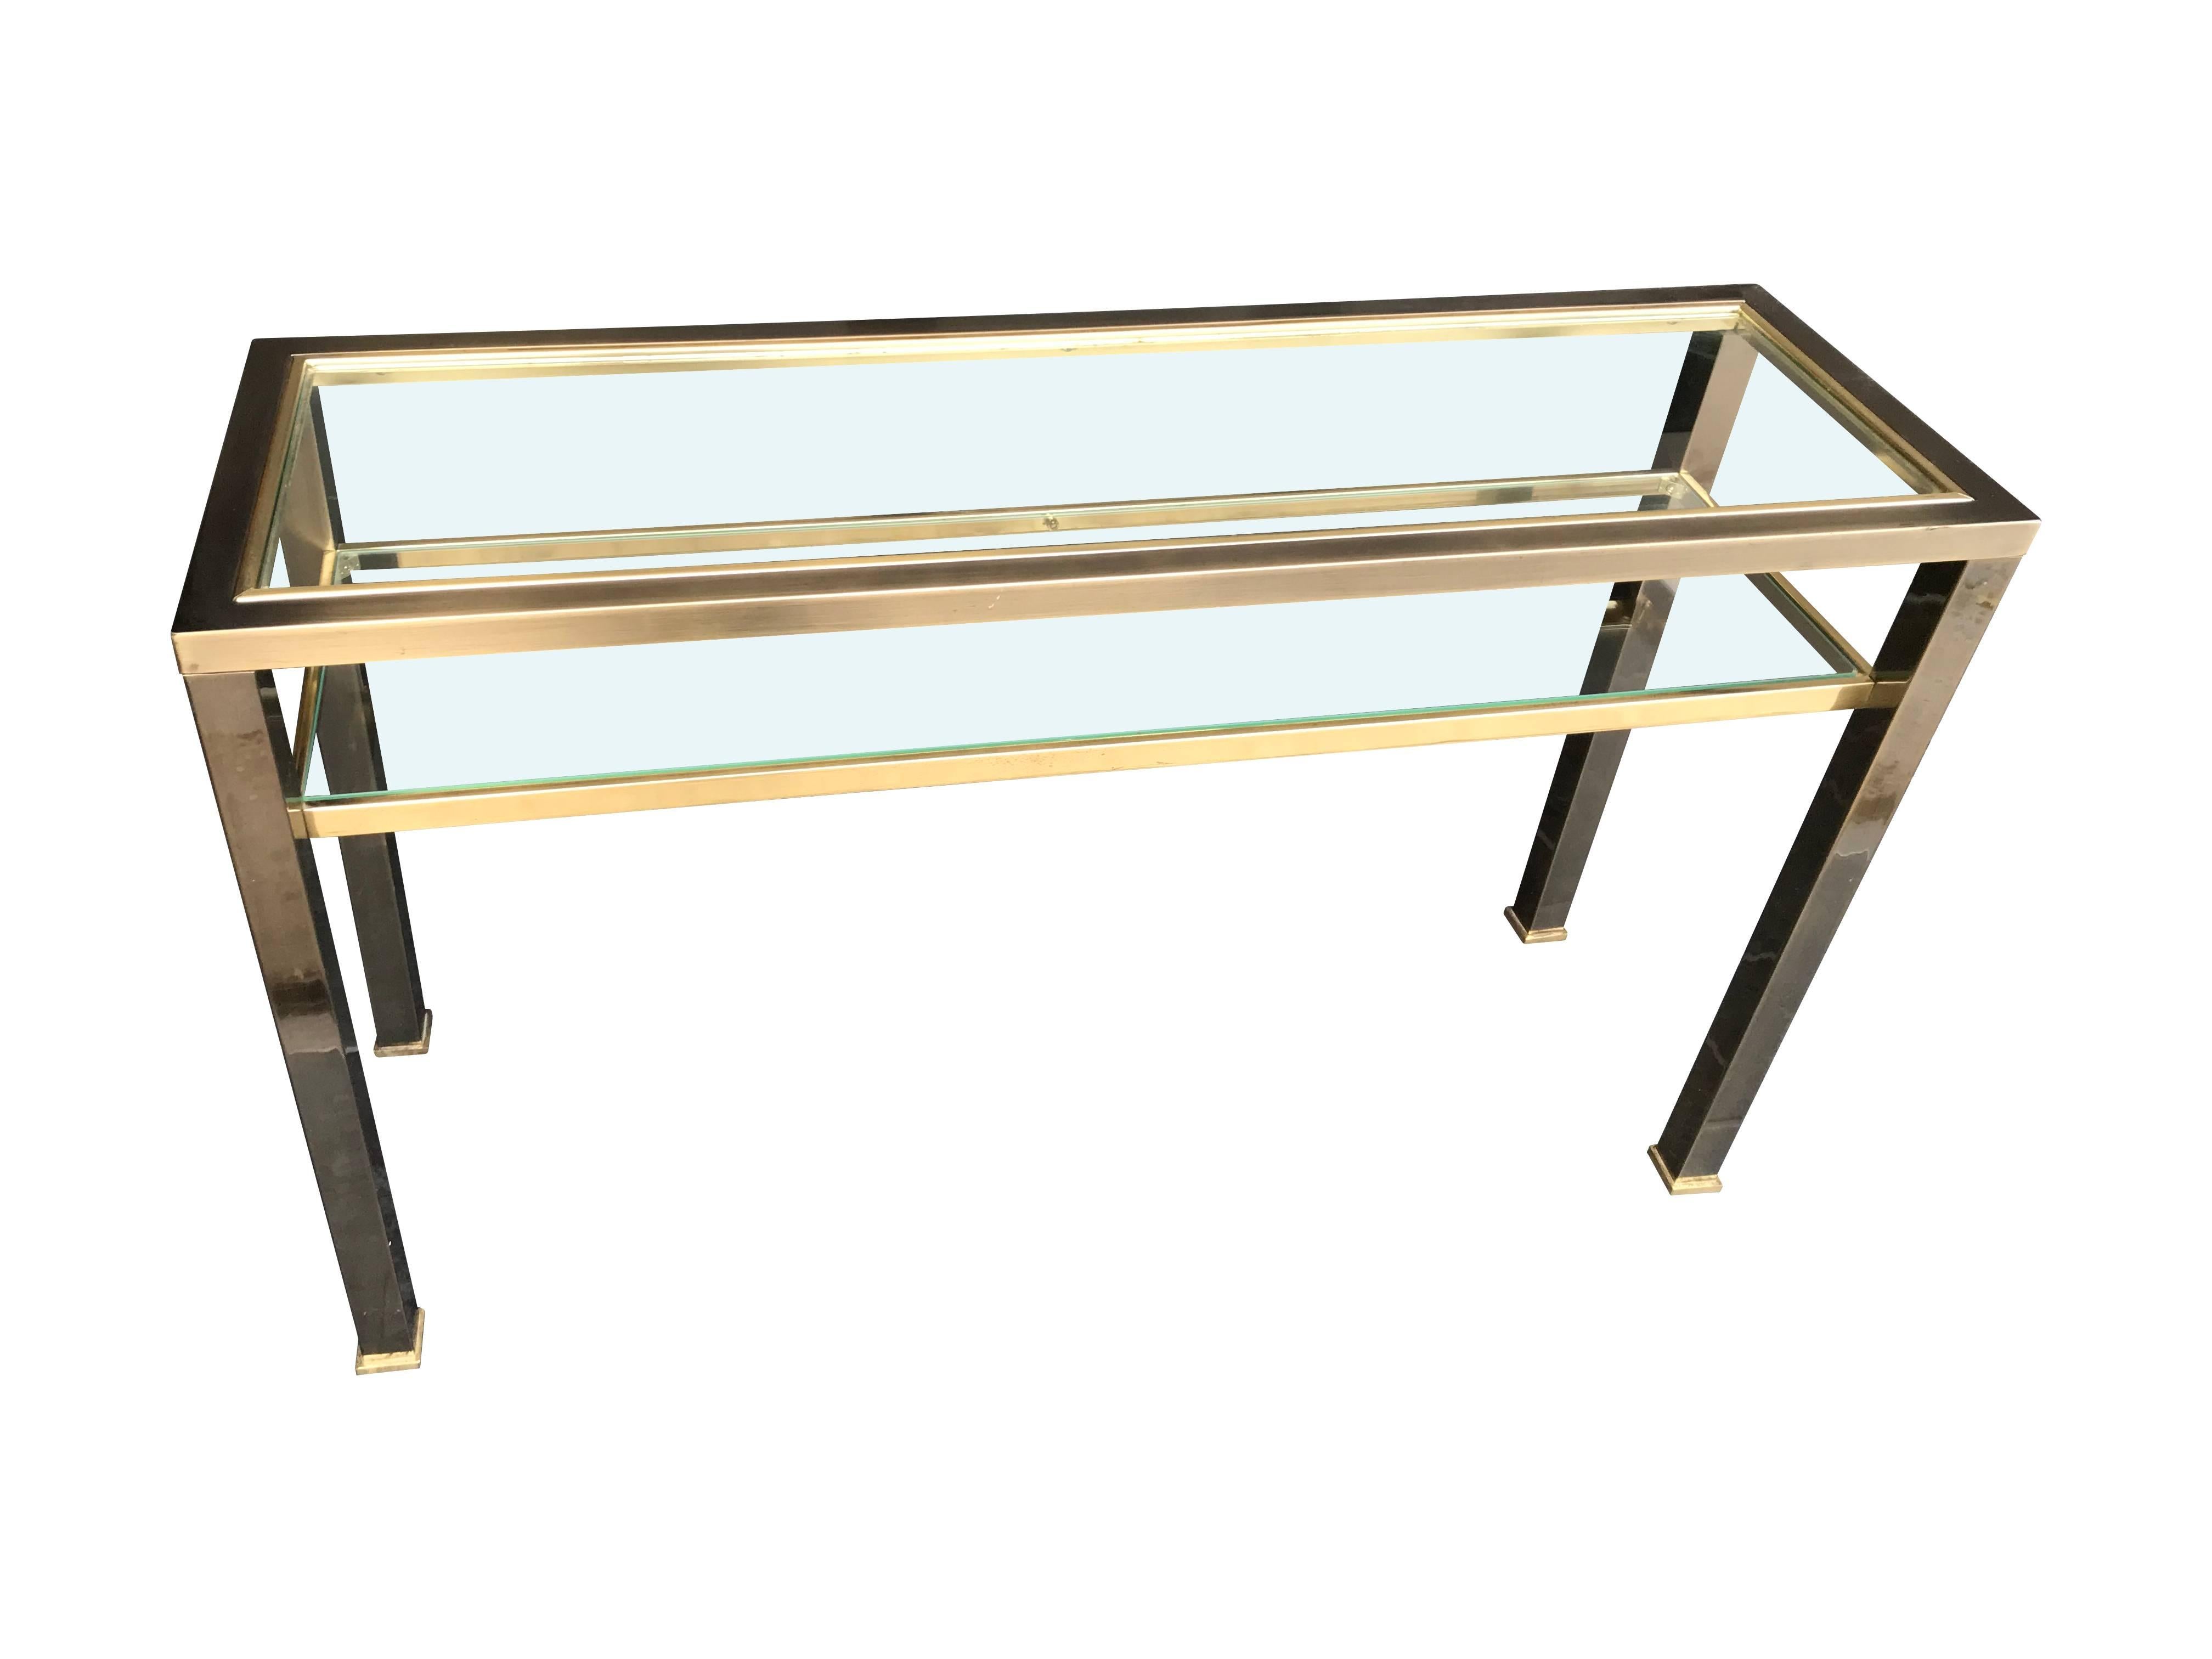 A Belgo Chrome console table with smoked brushed metal finish and brass with two glass shelves.